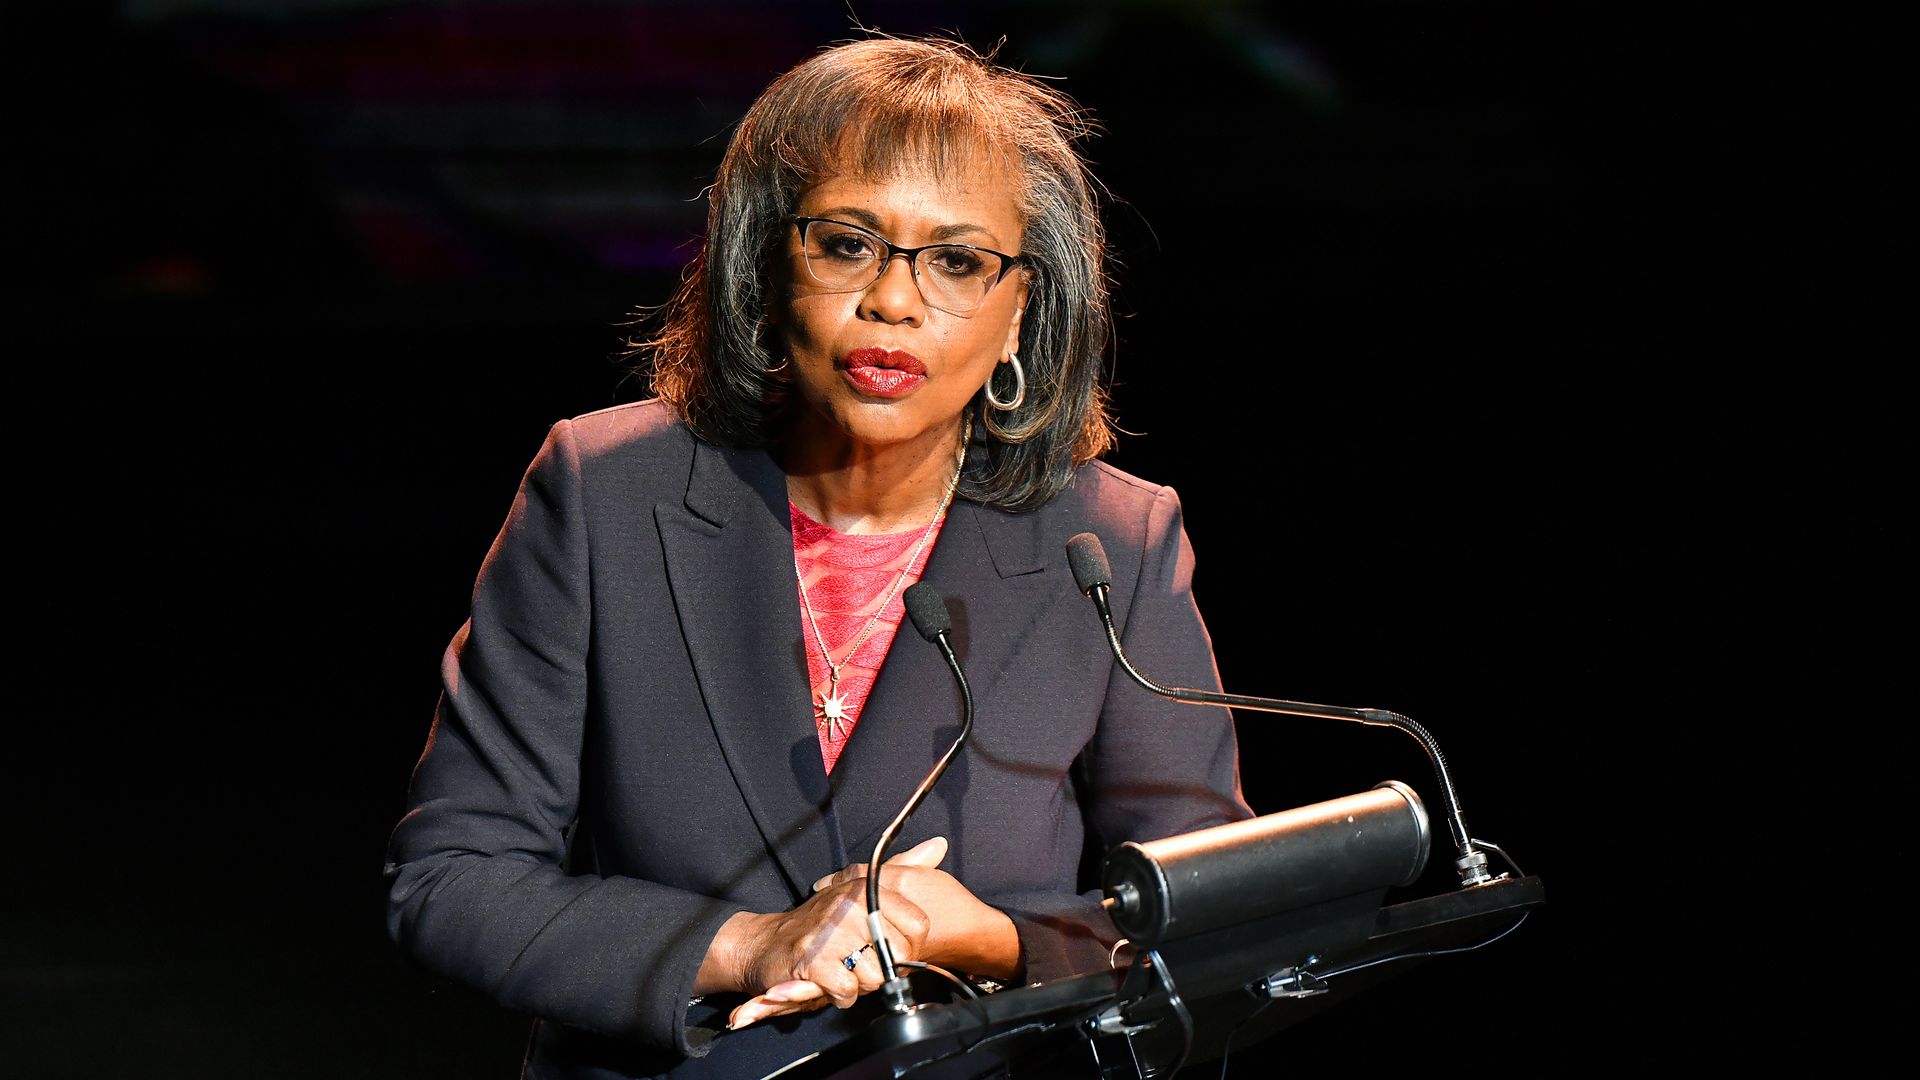 Anita Hill Is Creating an App to Hold Serial Abusers Accountable